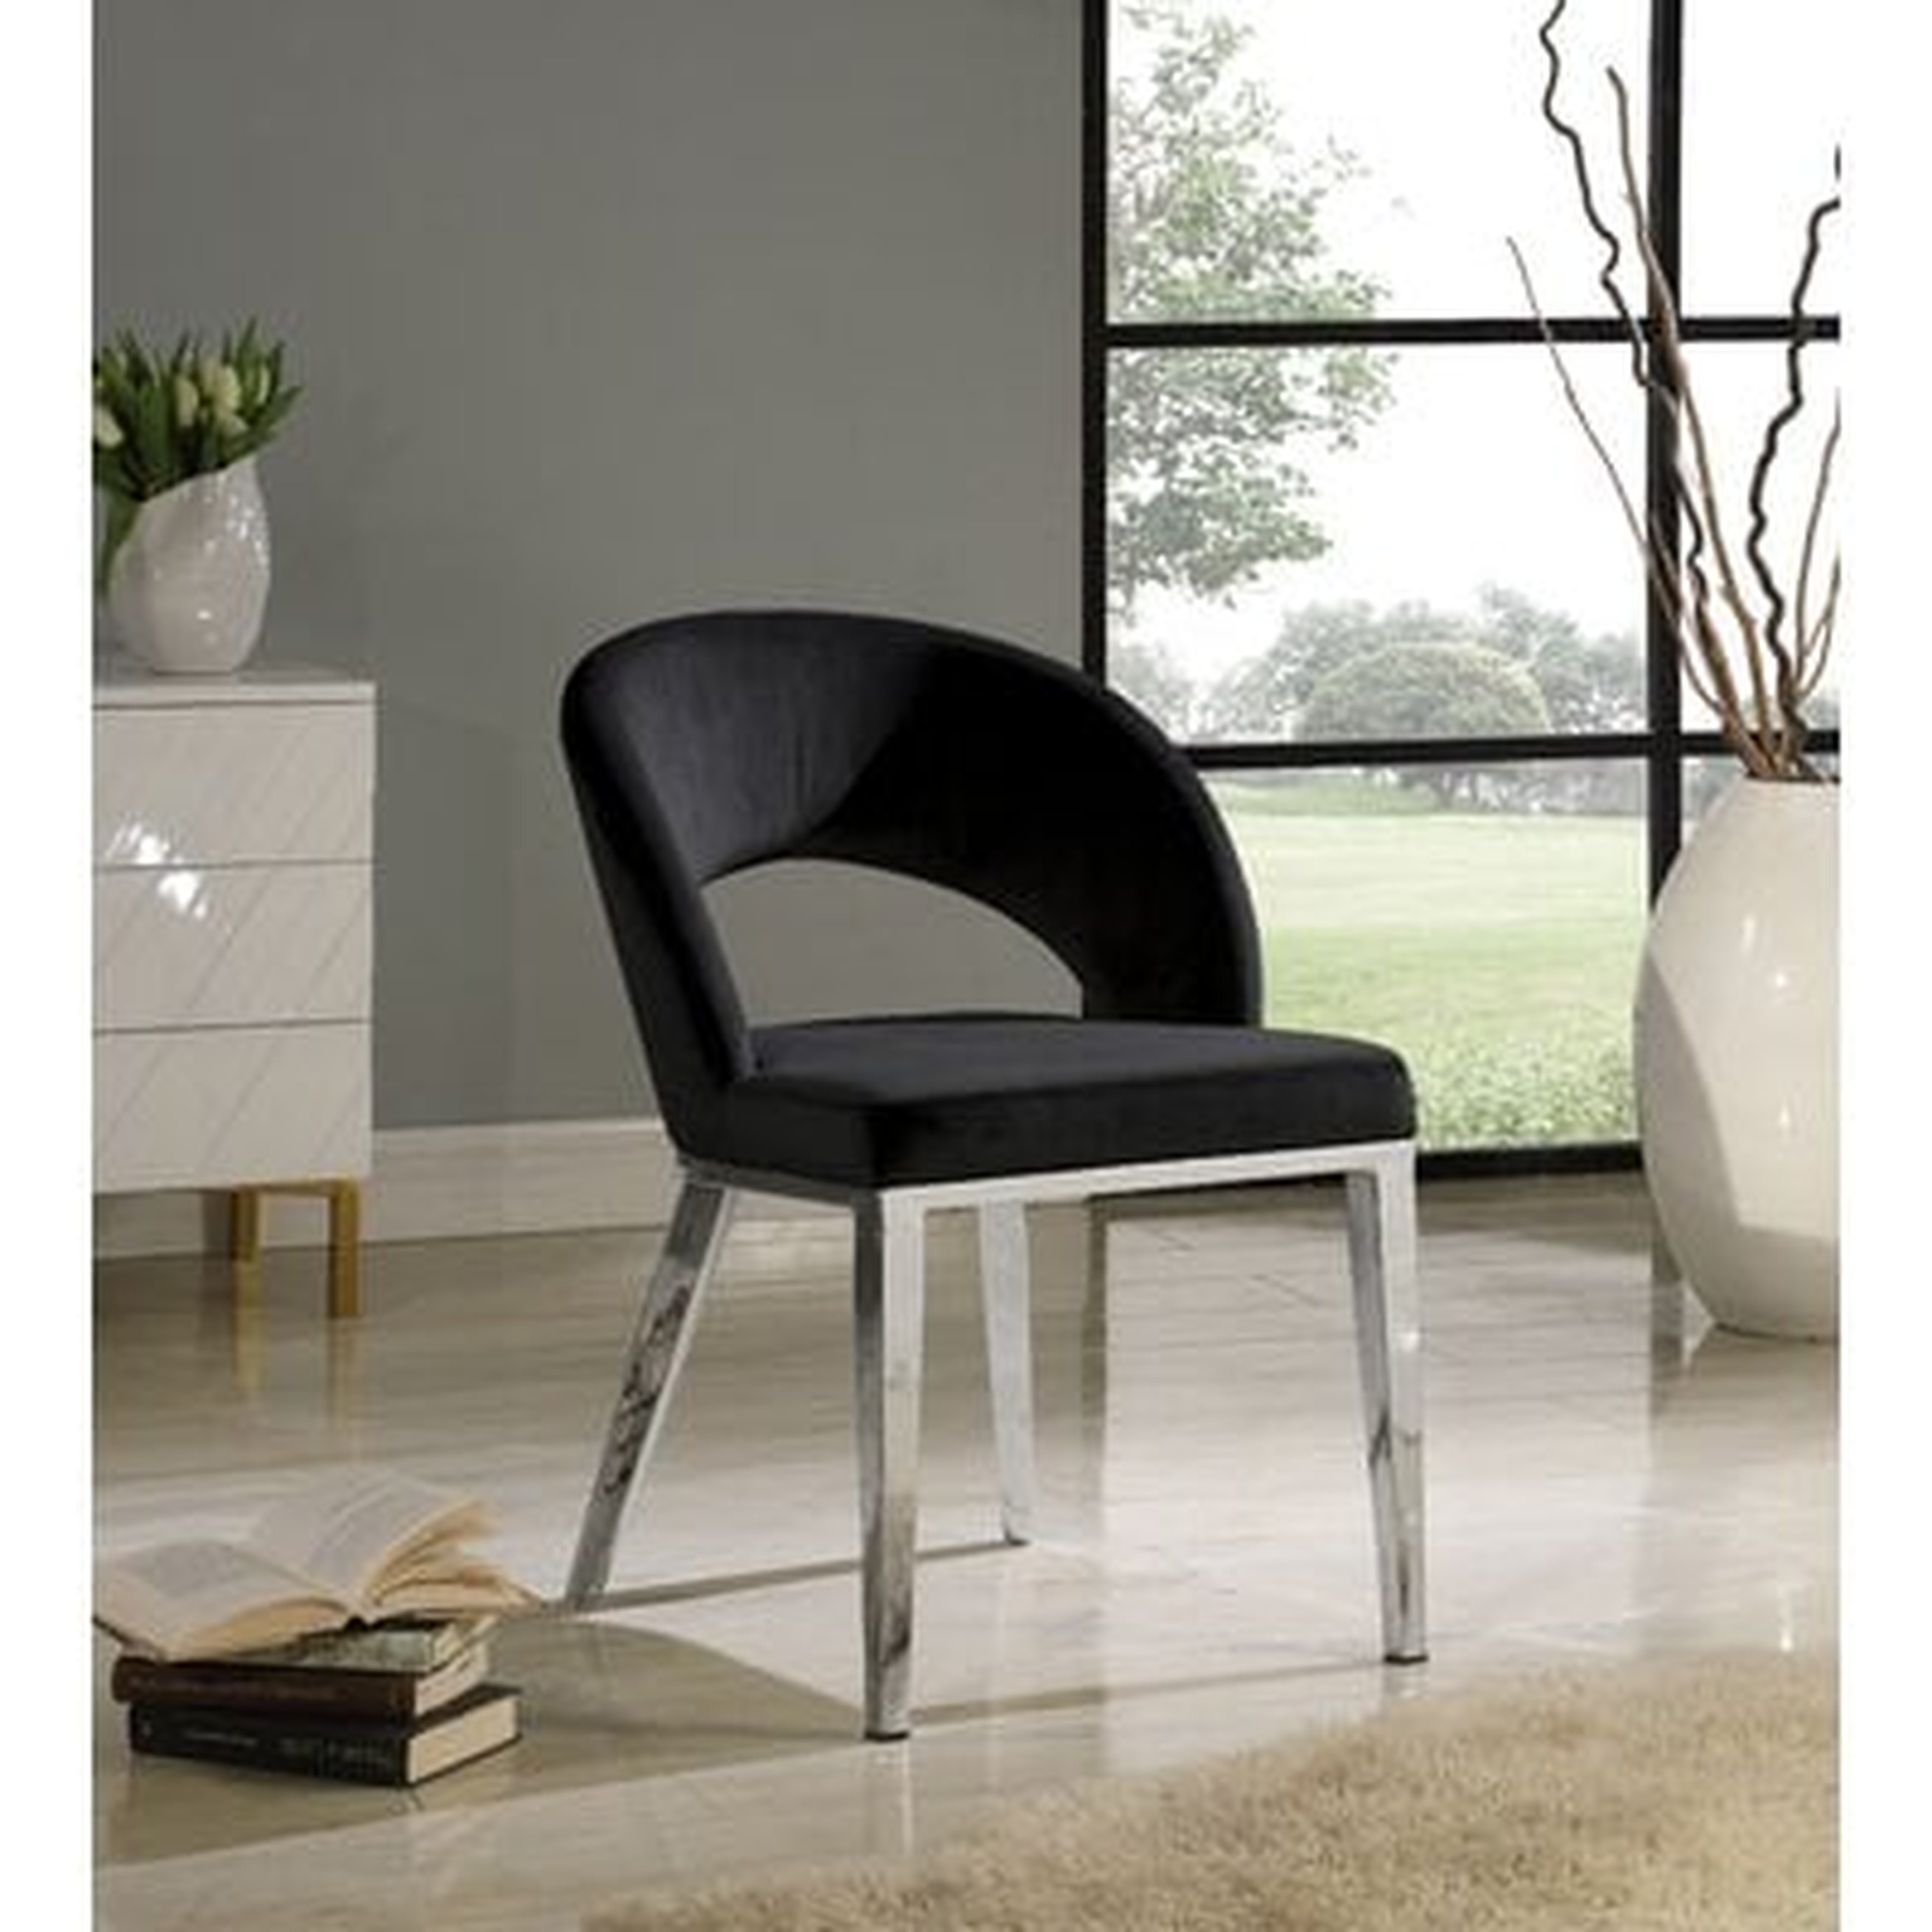 Cambria Upholstered Dining Chair - Wayfair